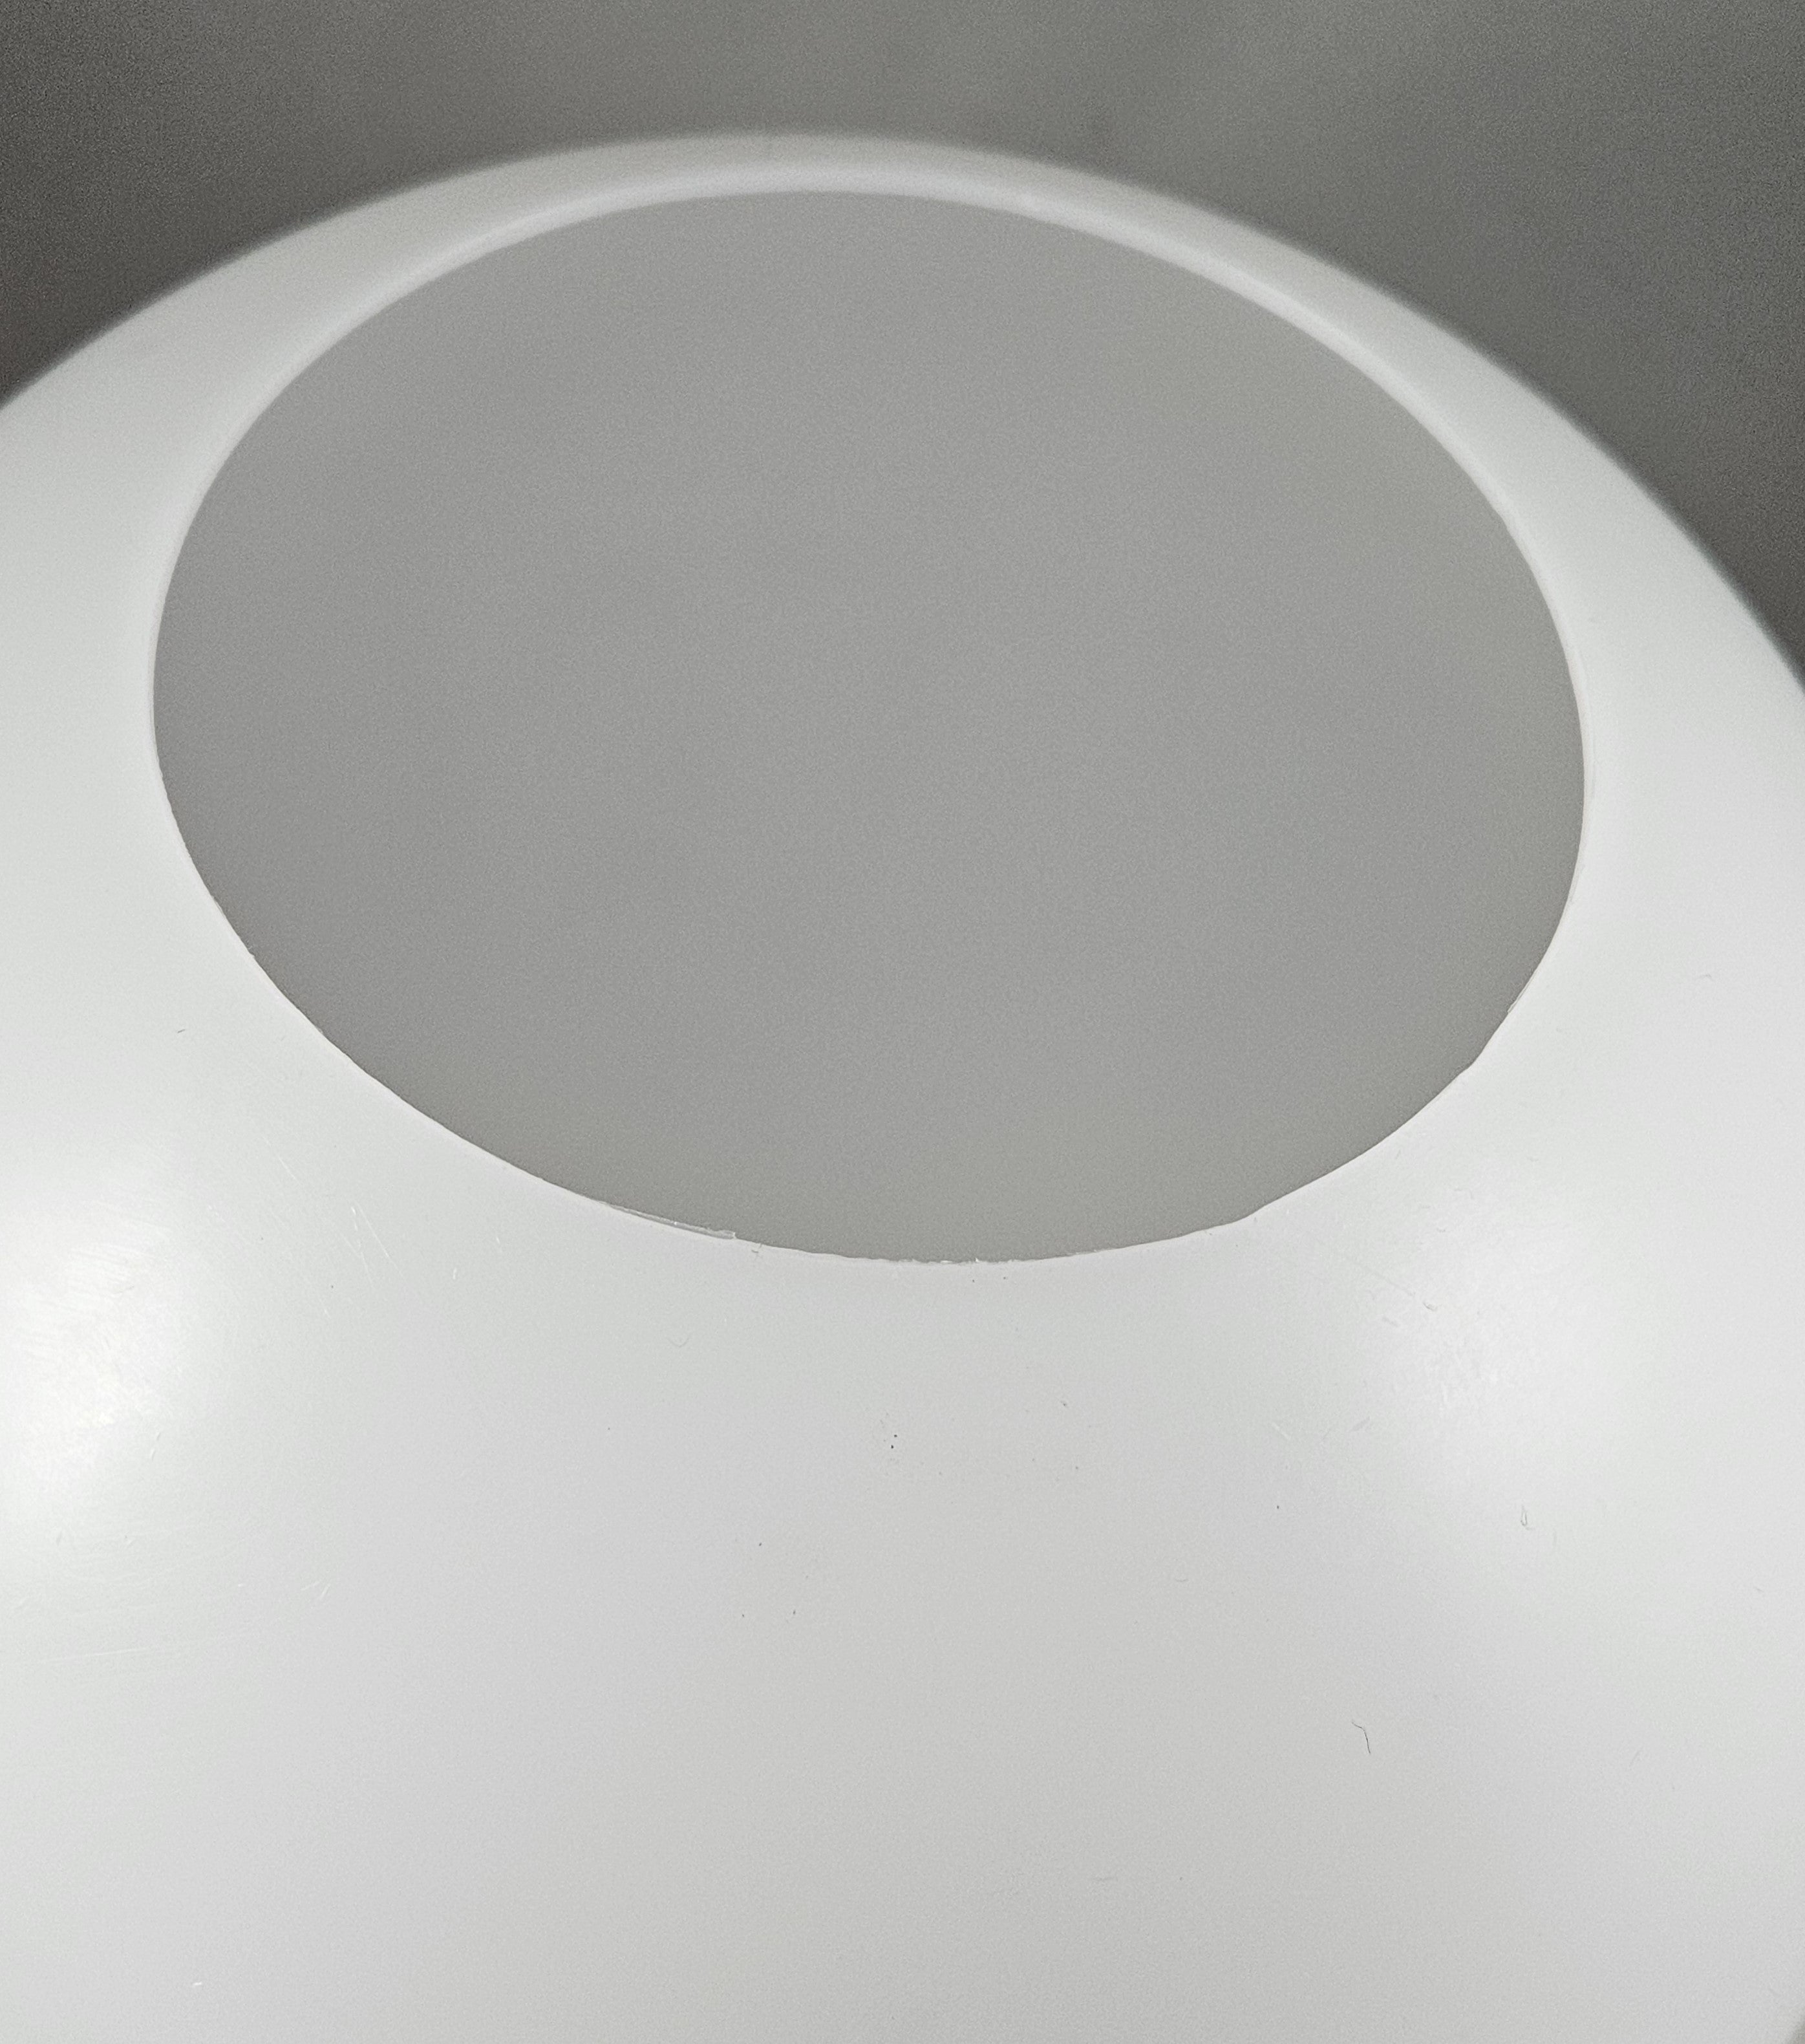 12" Neckless Polyethylene Globe w/ 5-1/4" Hole (see more description & more pictures)